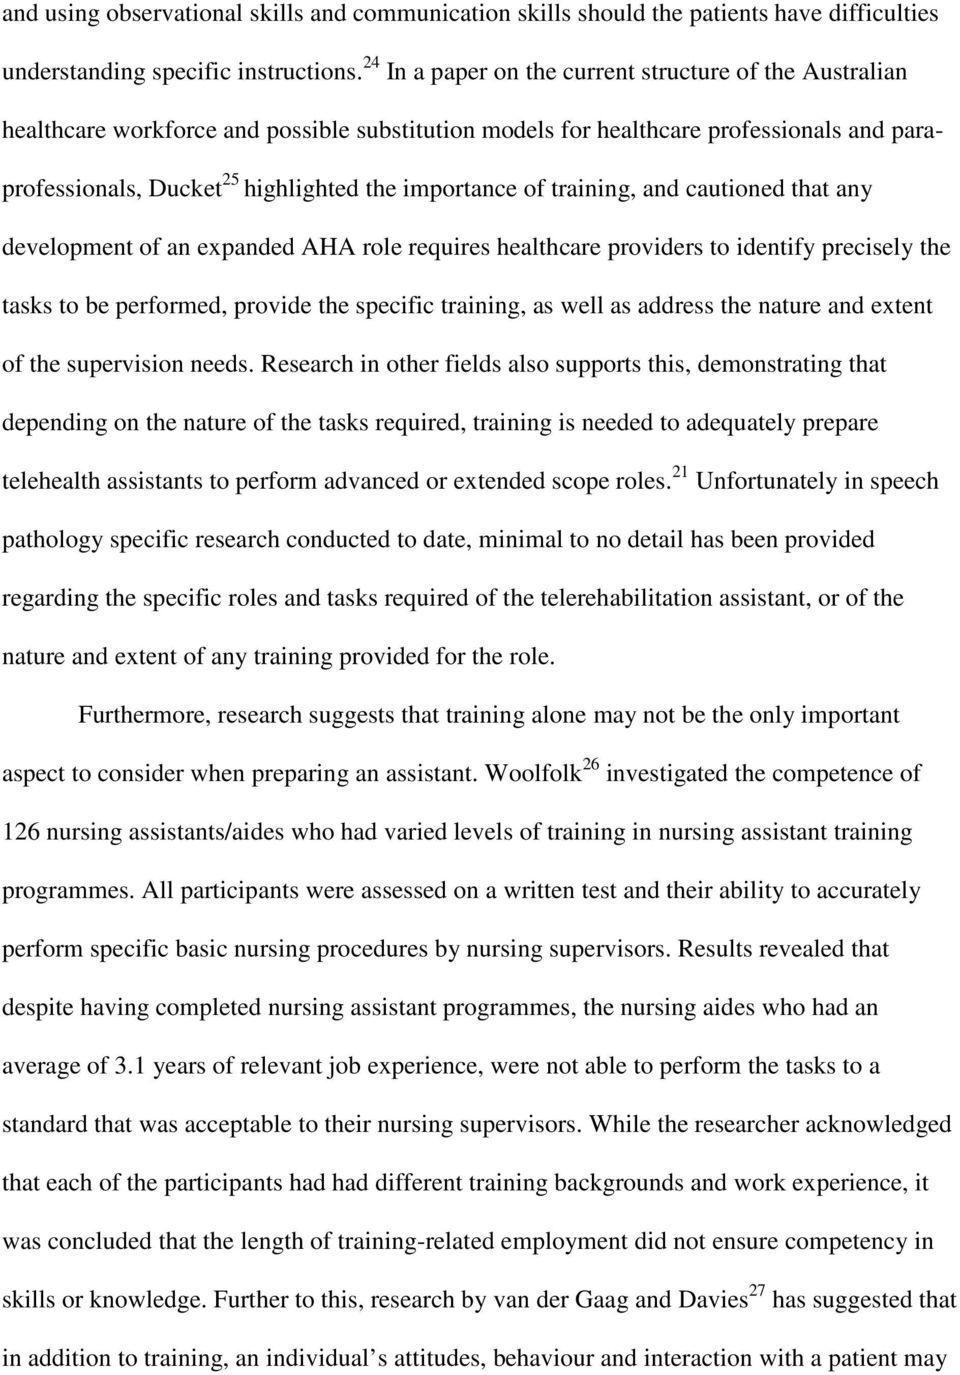 of training, and cautioned that any development of an expanded AHA role requires healthcare providers to identify precisely the tasks to be performed, provide the specific training, as well as